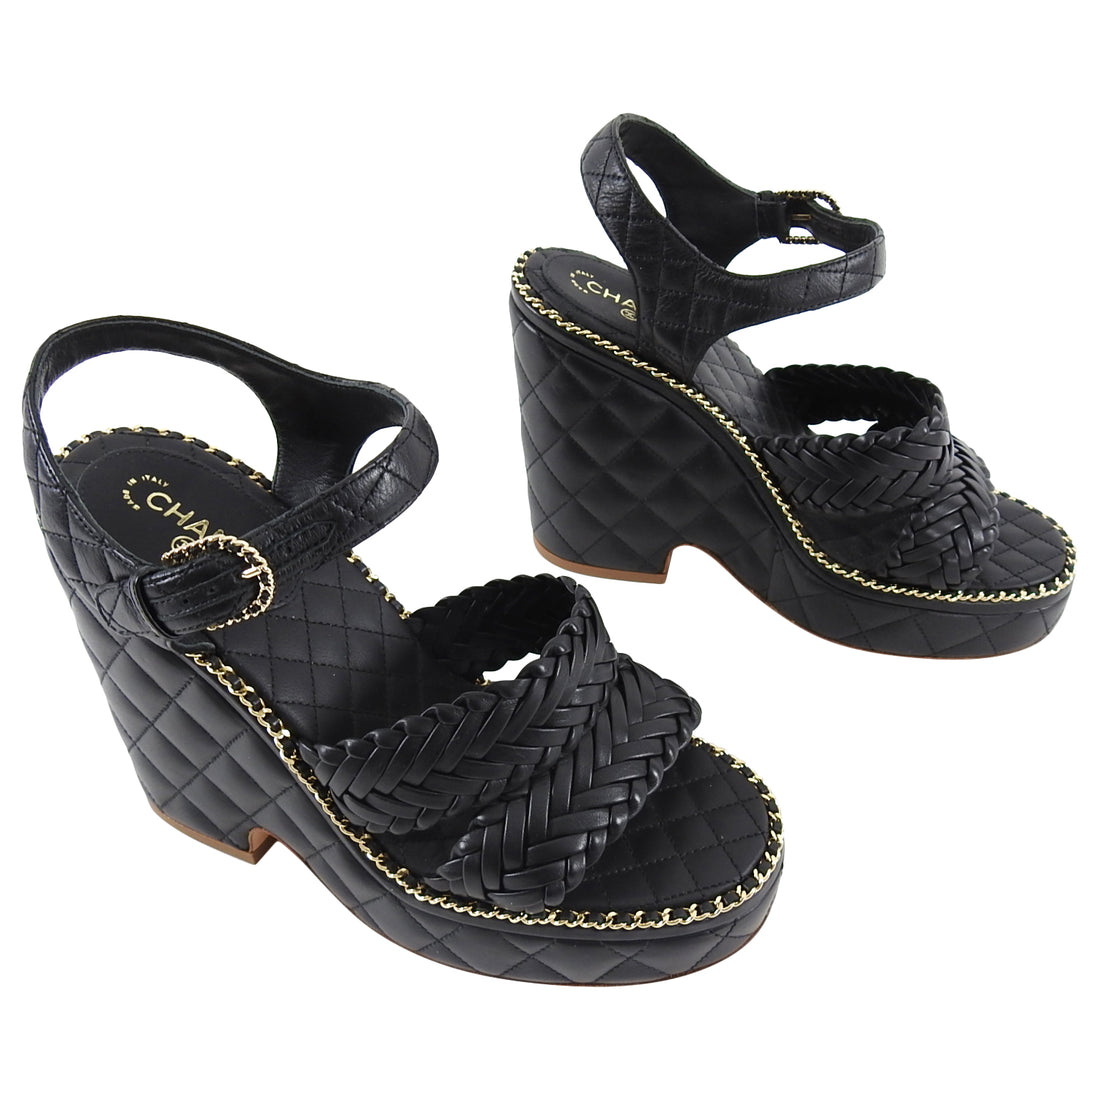 Chanel Black Quilt Wedge Sandal with Gold Chain CC Detail - 37.5 / 7